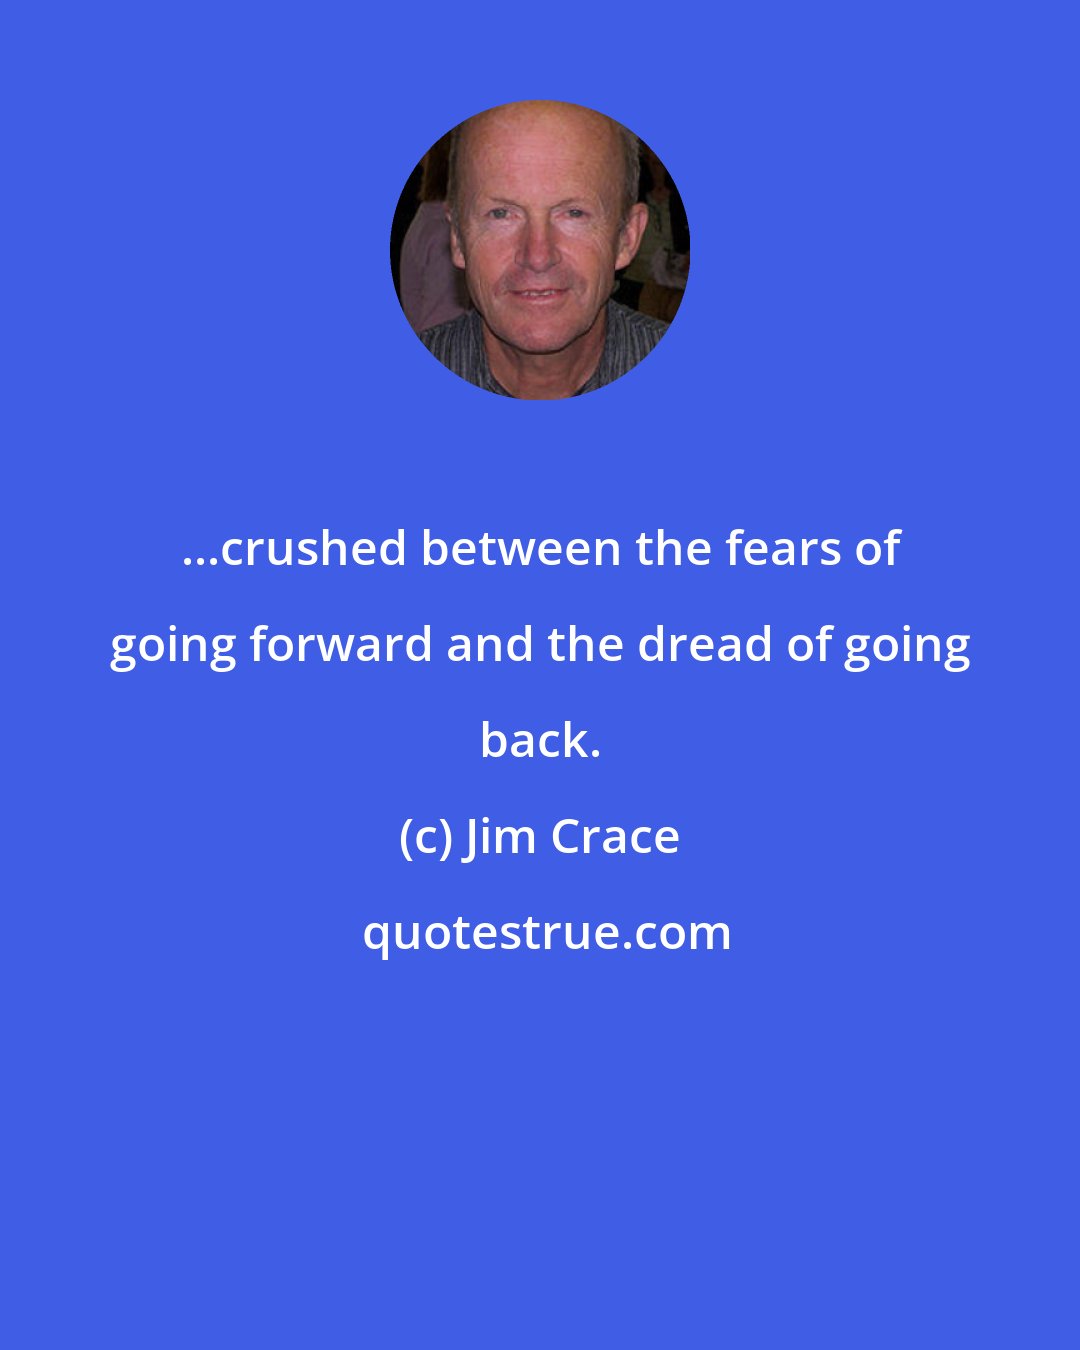 Jim Crace: ...crushed between the fears of going forward and the dread of going back.